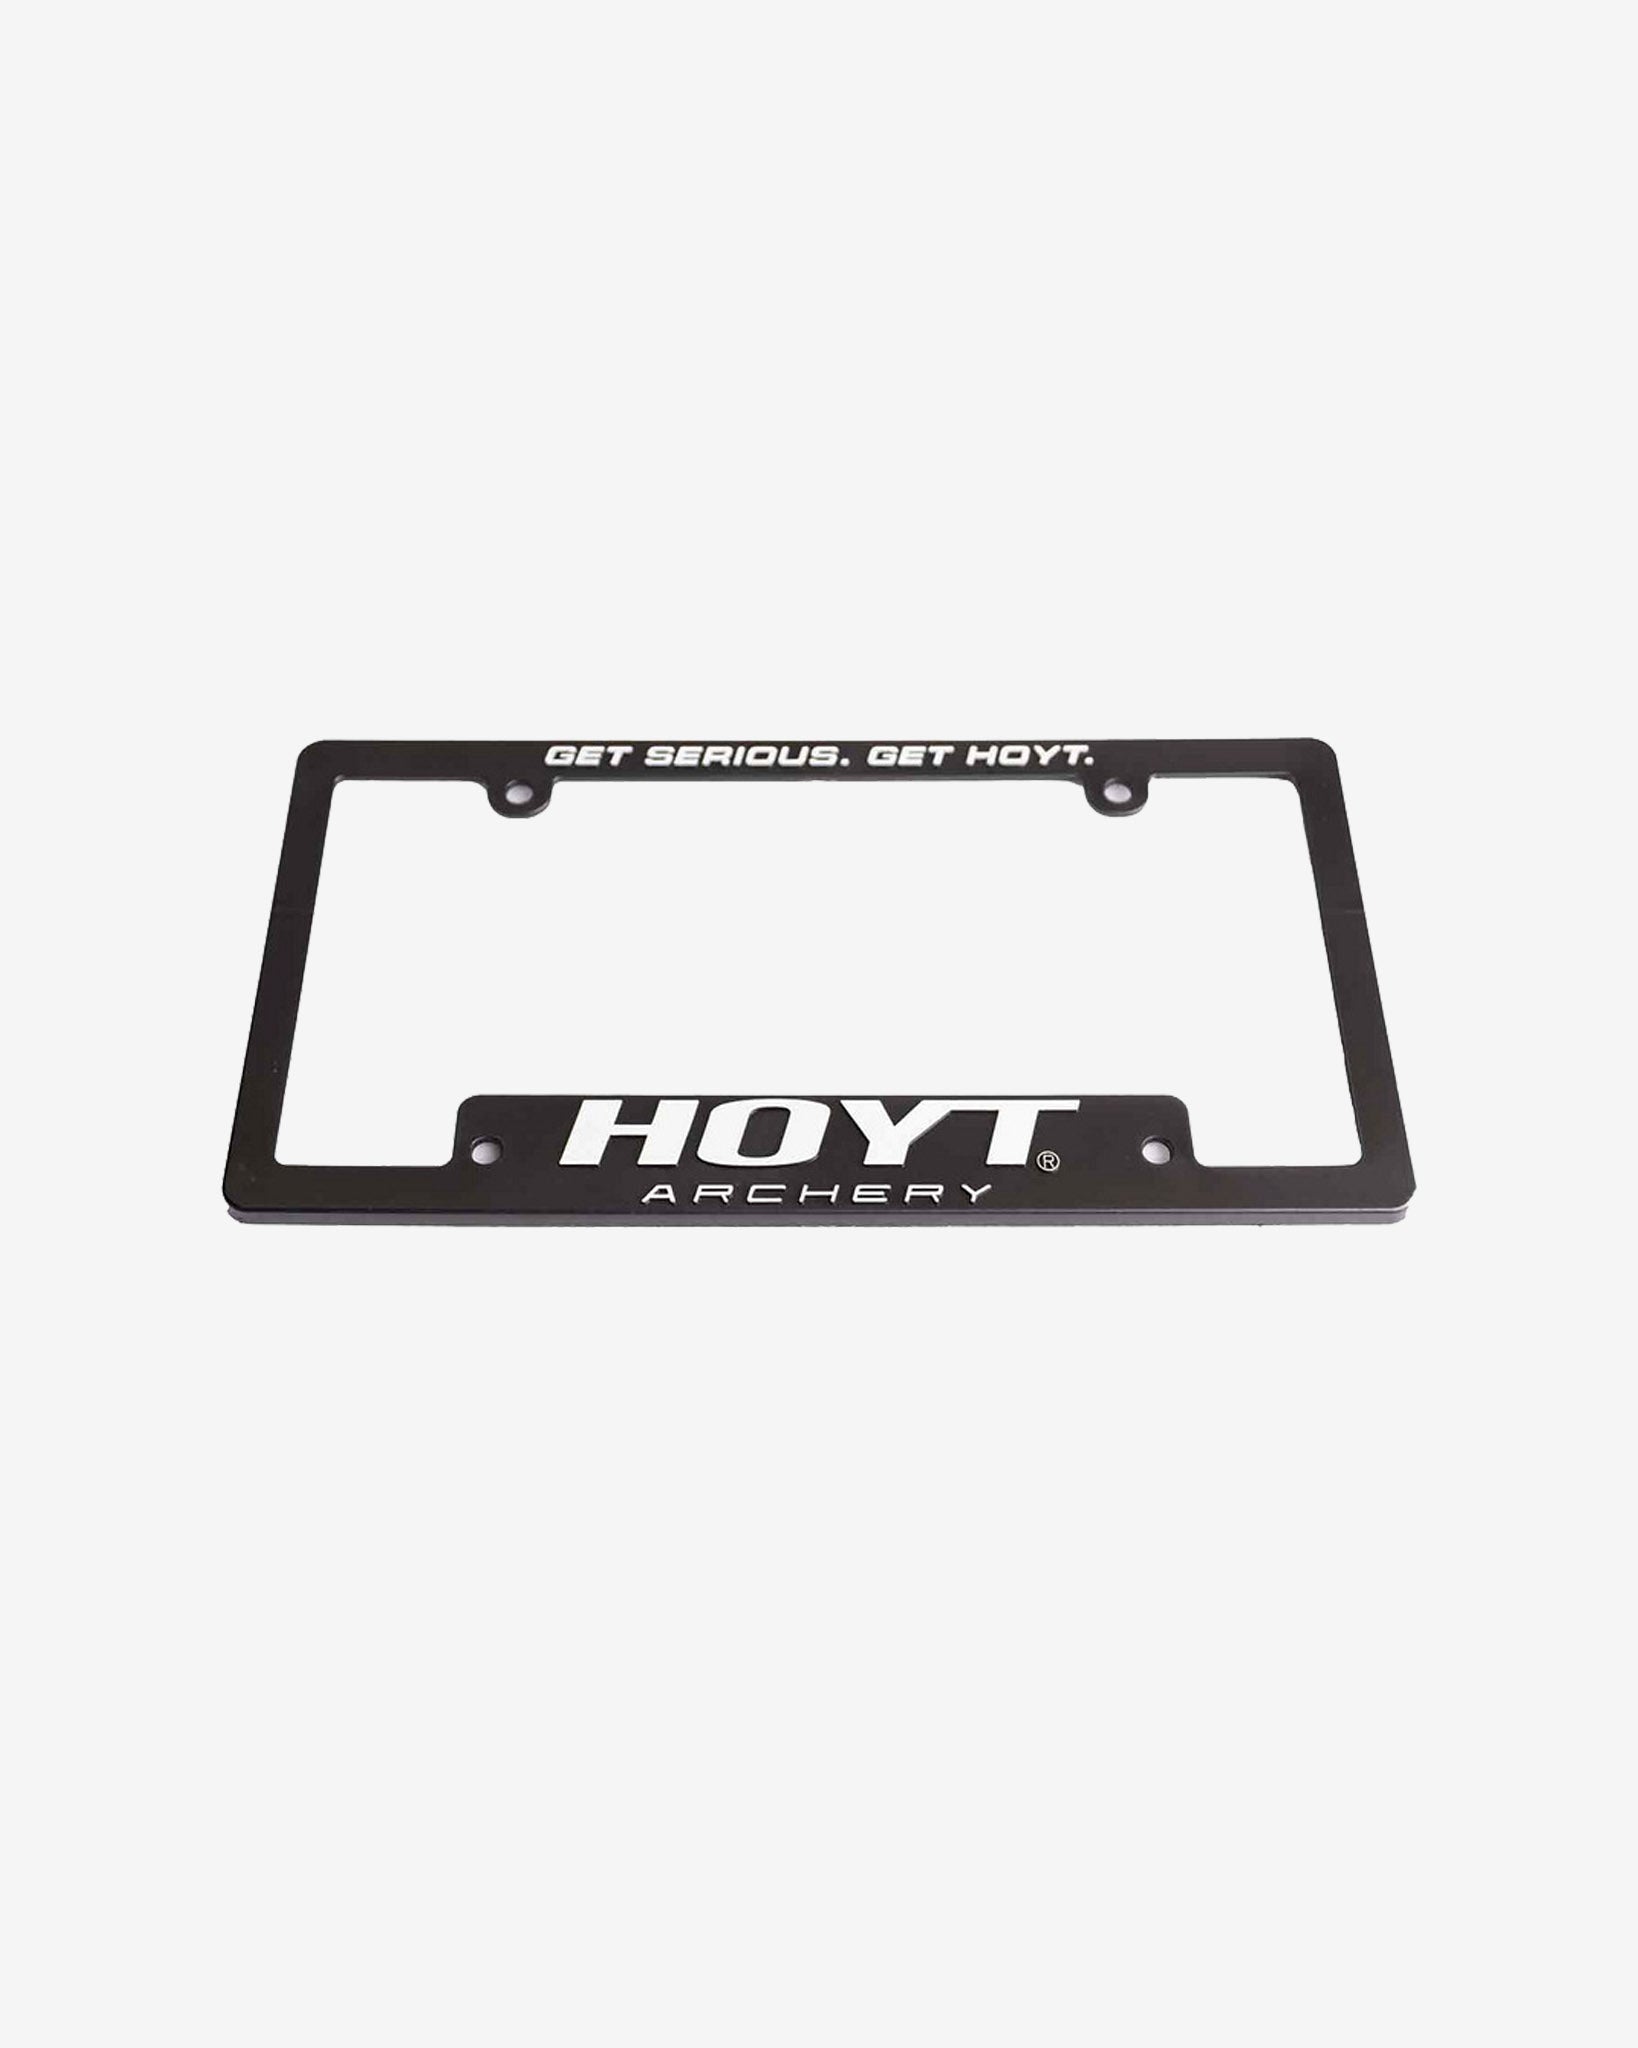 Hoyt Archery License Plate Cover